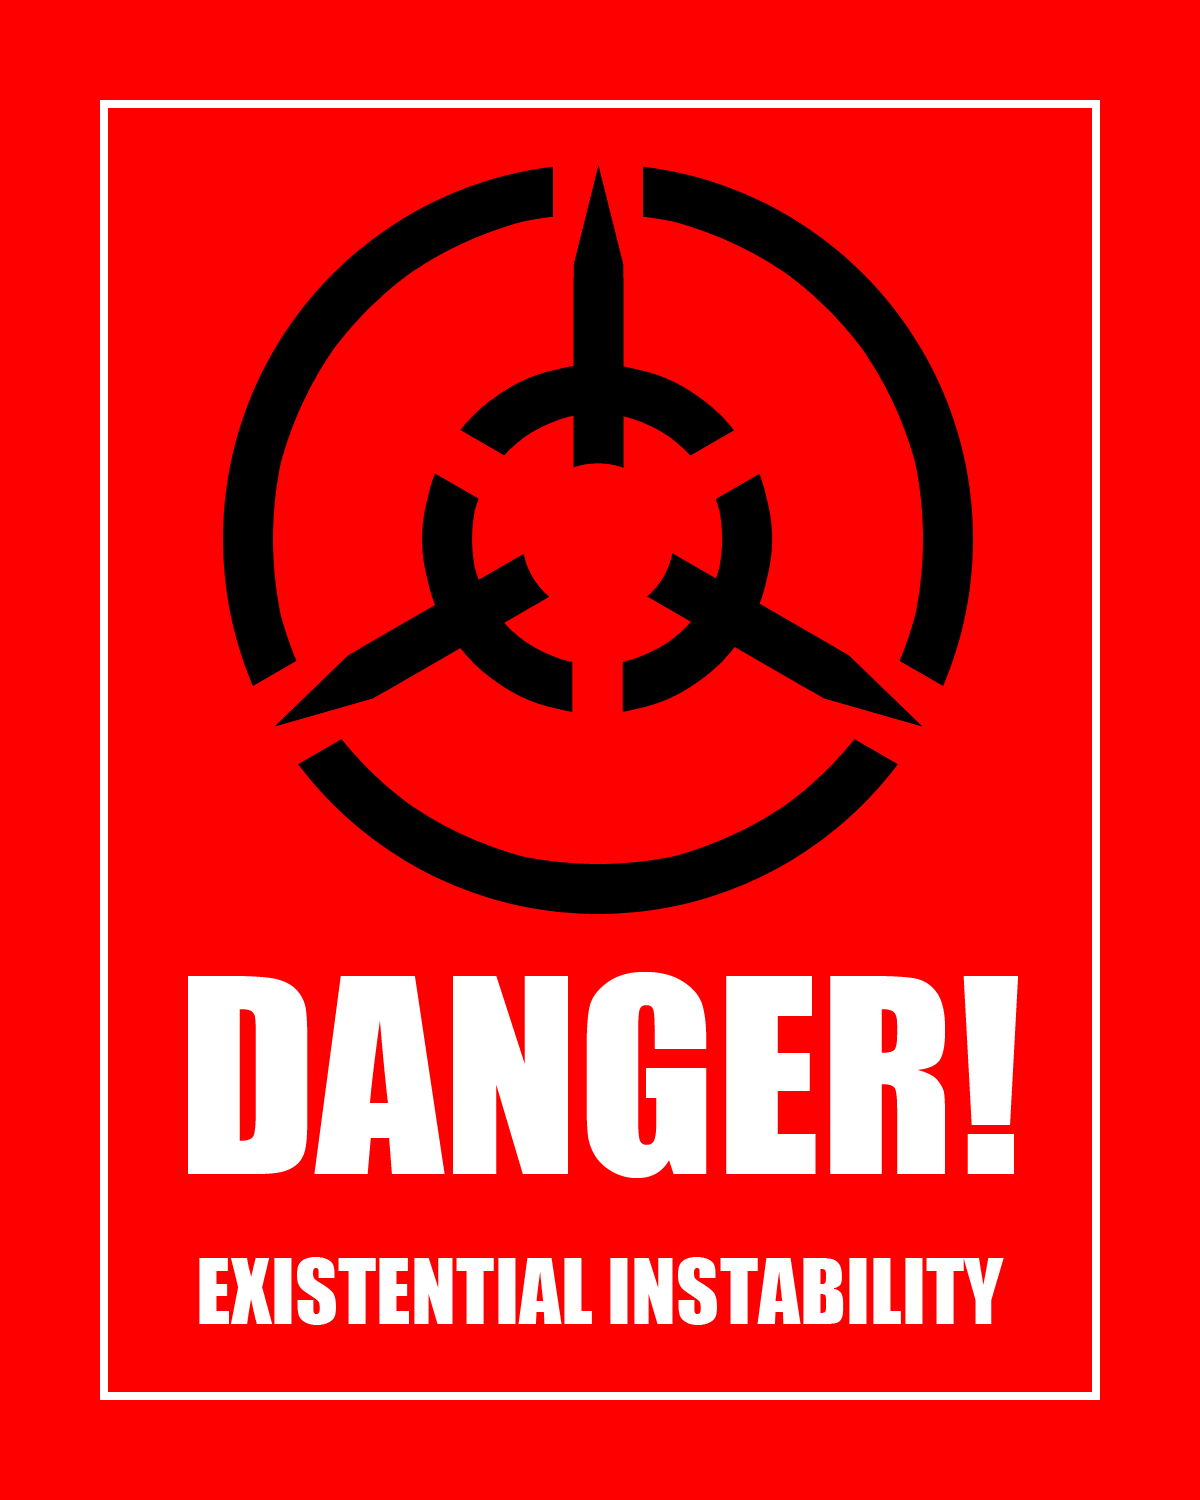 Existential Instability Warning Sign